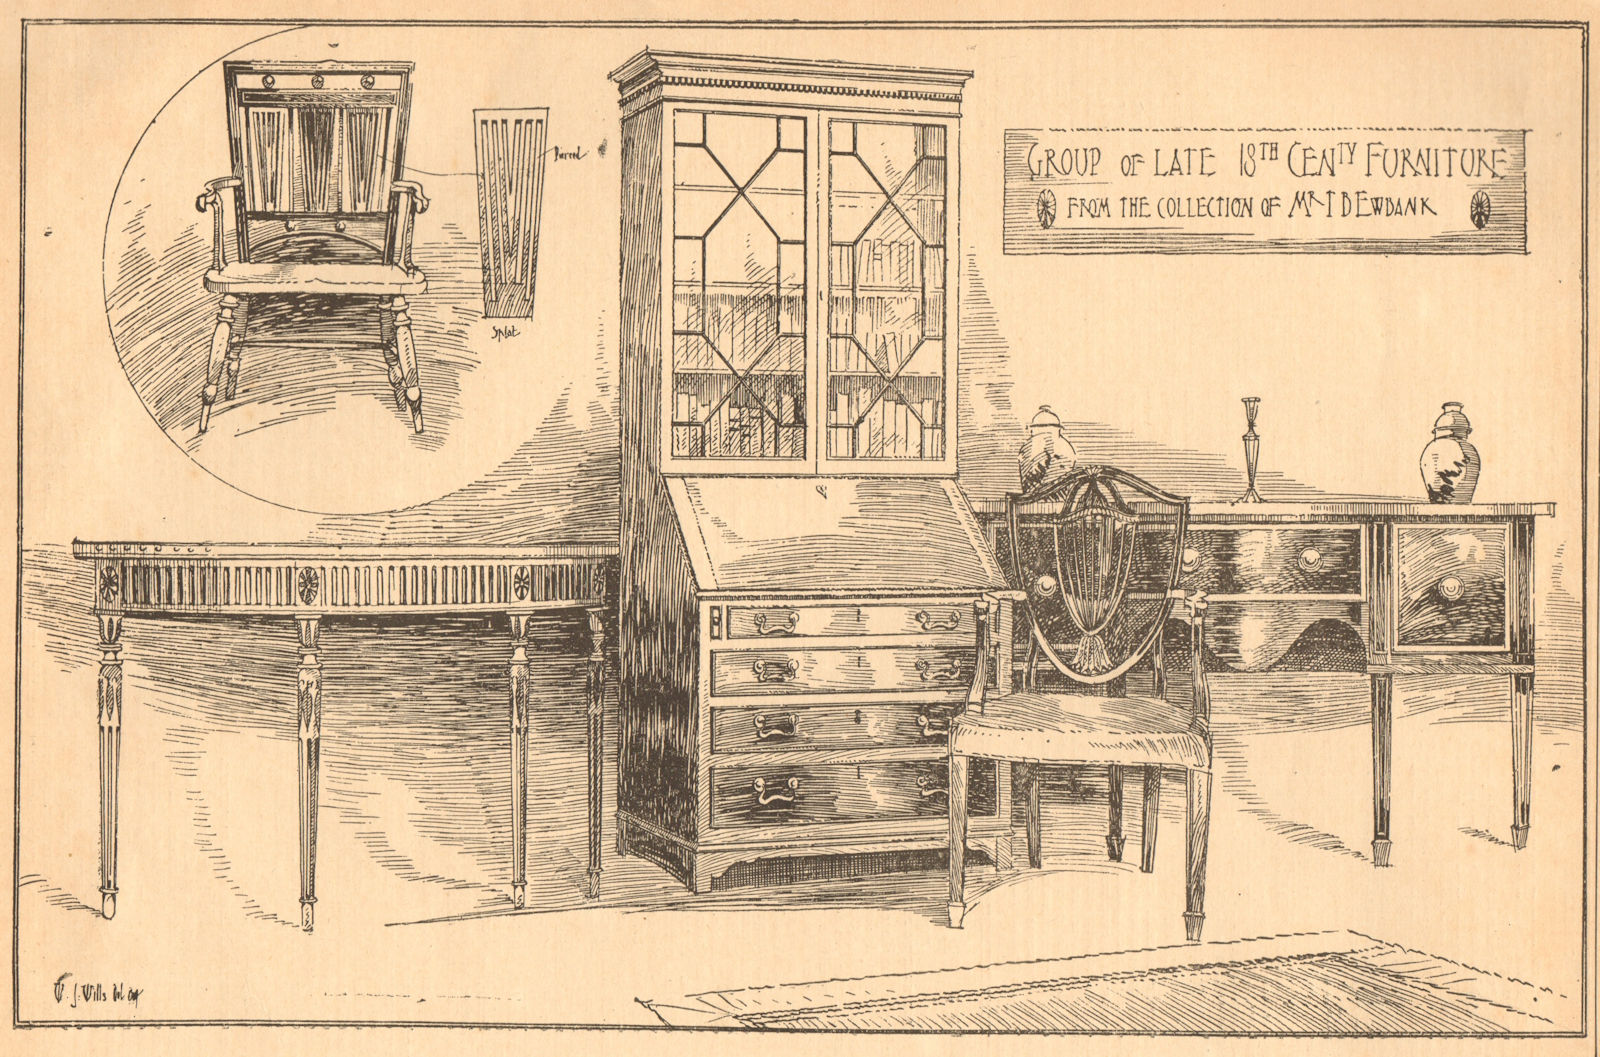 Late 18th century furniture from the collection of Mr T.B. Ewbank 1904 print